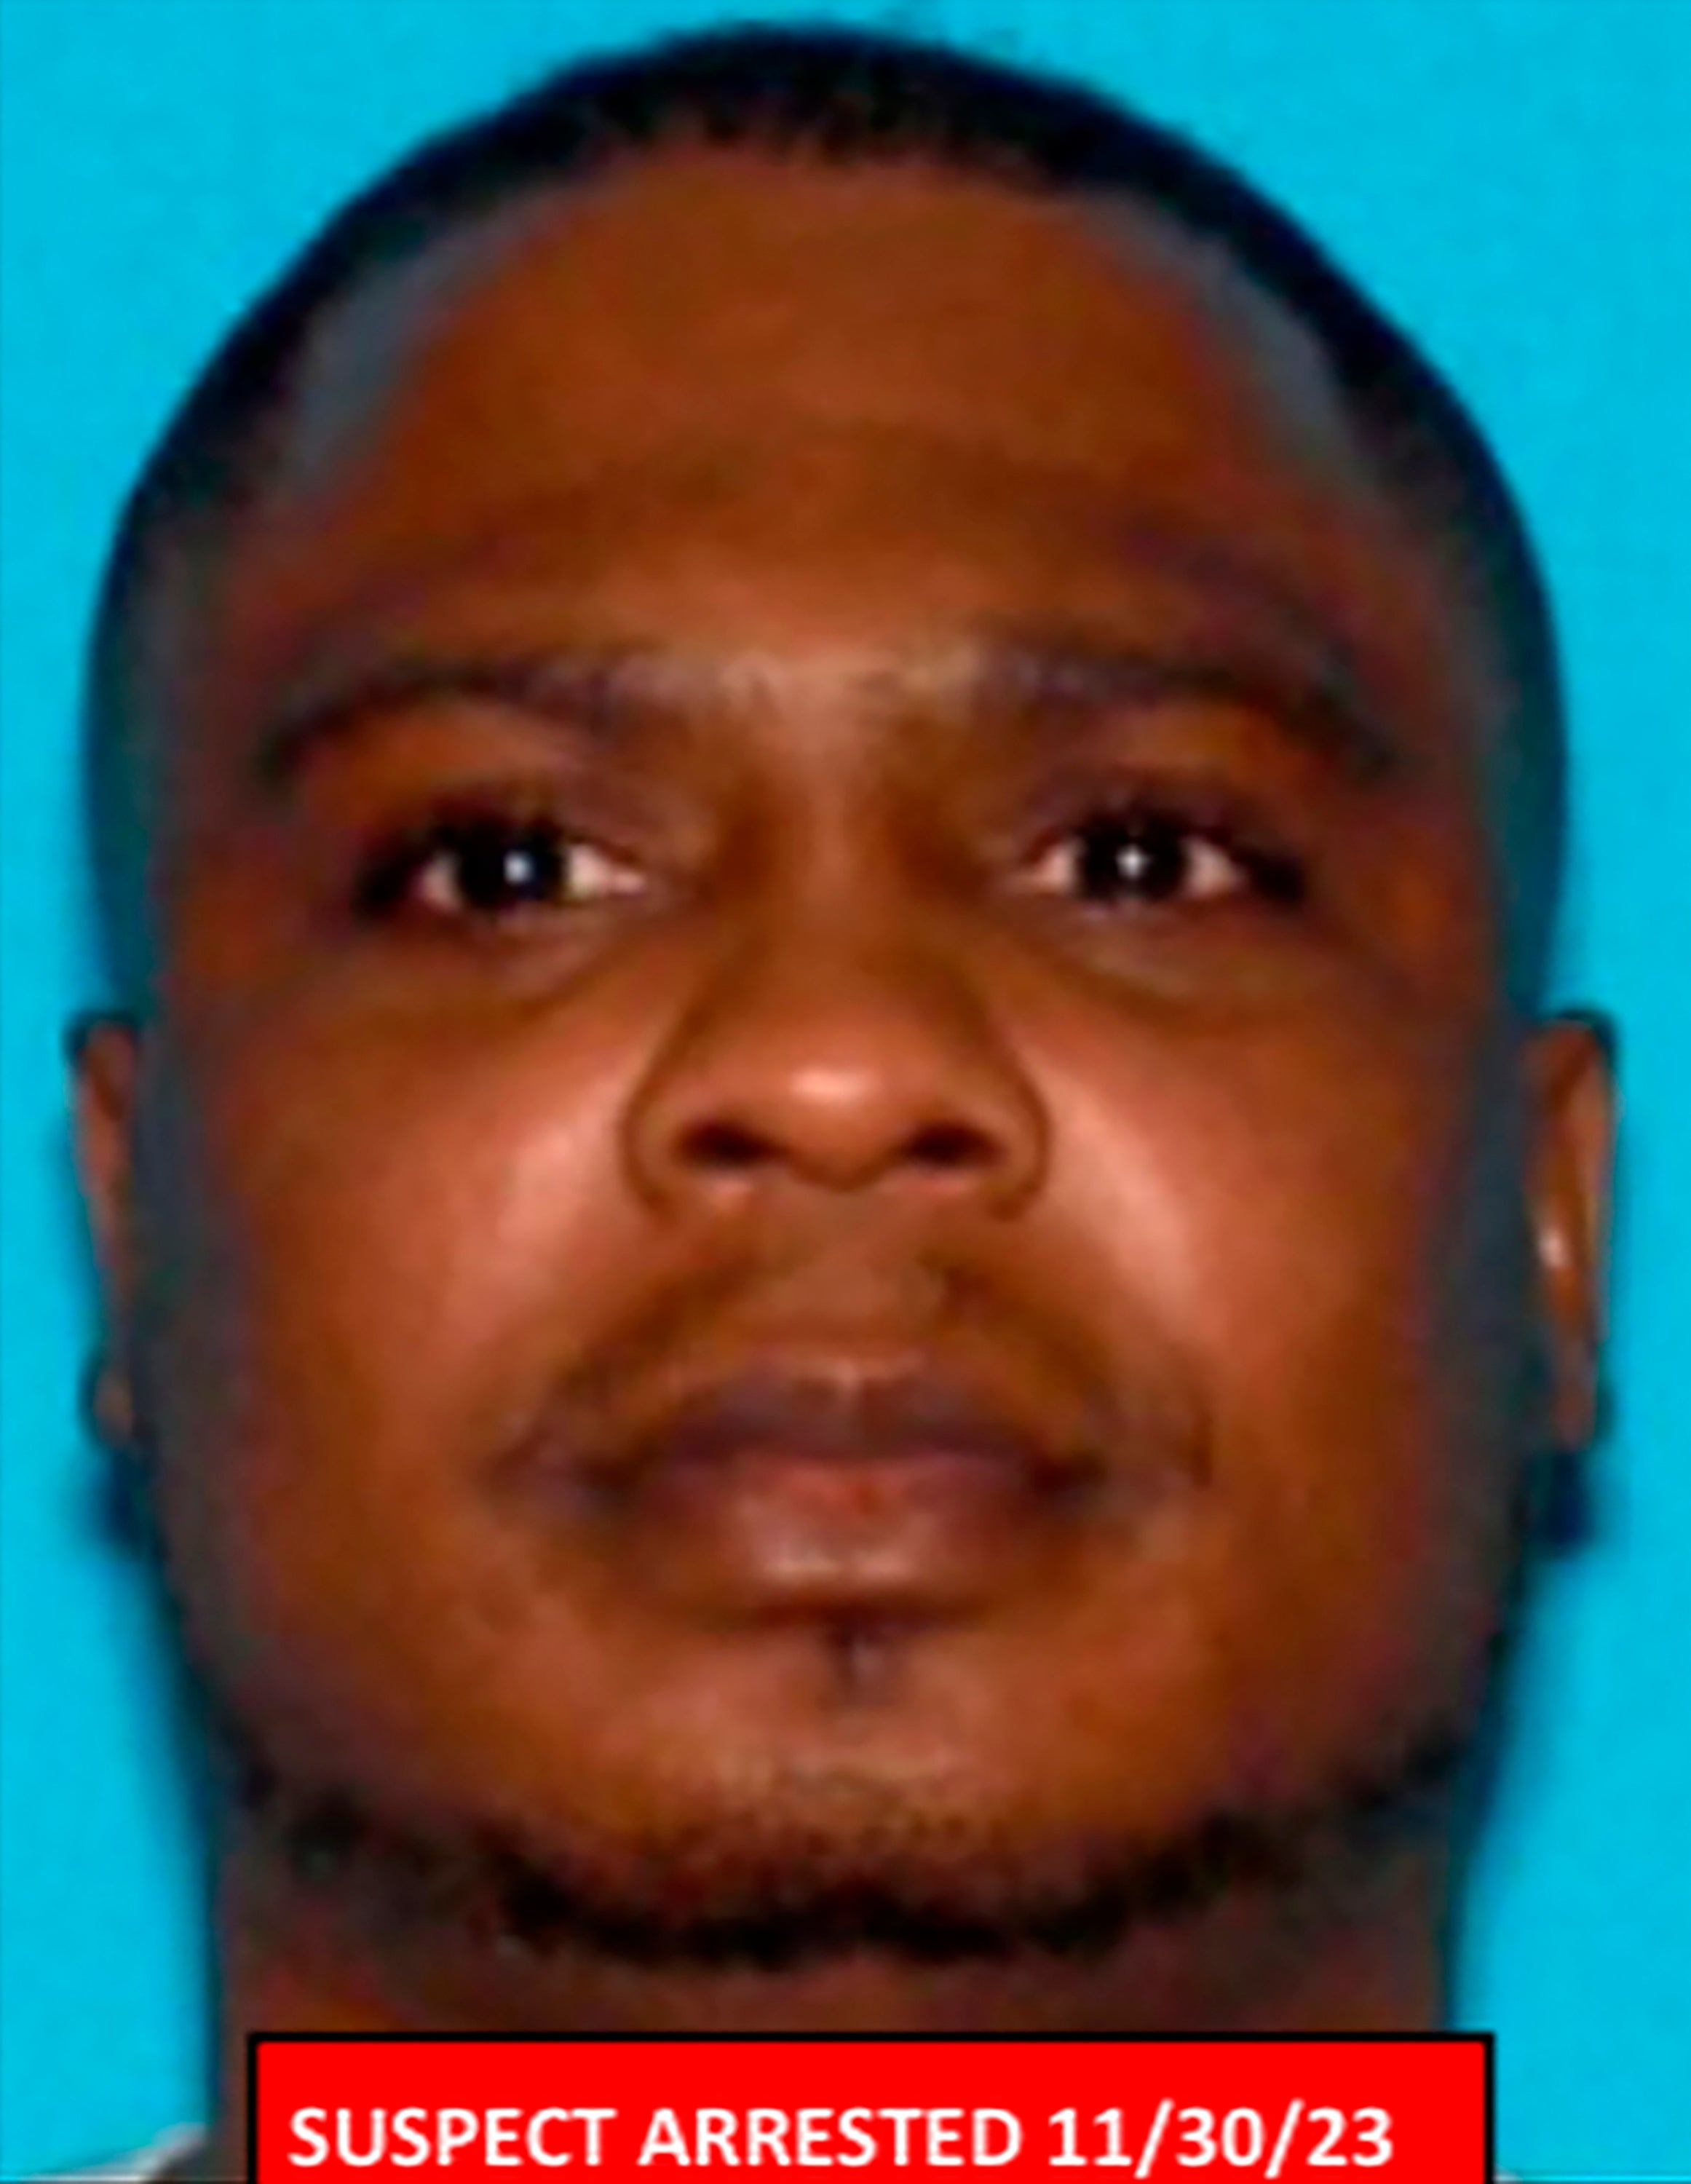 This photo released by the Los Angeles County Sheriff's Department shows suspect Jerrid Joseph Powell